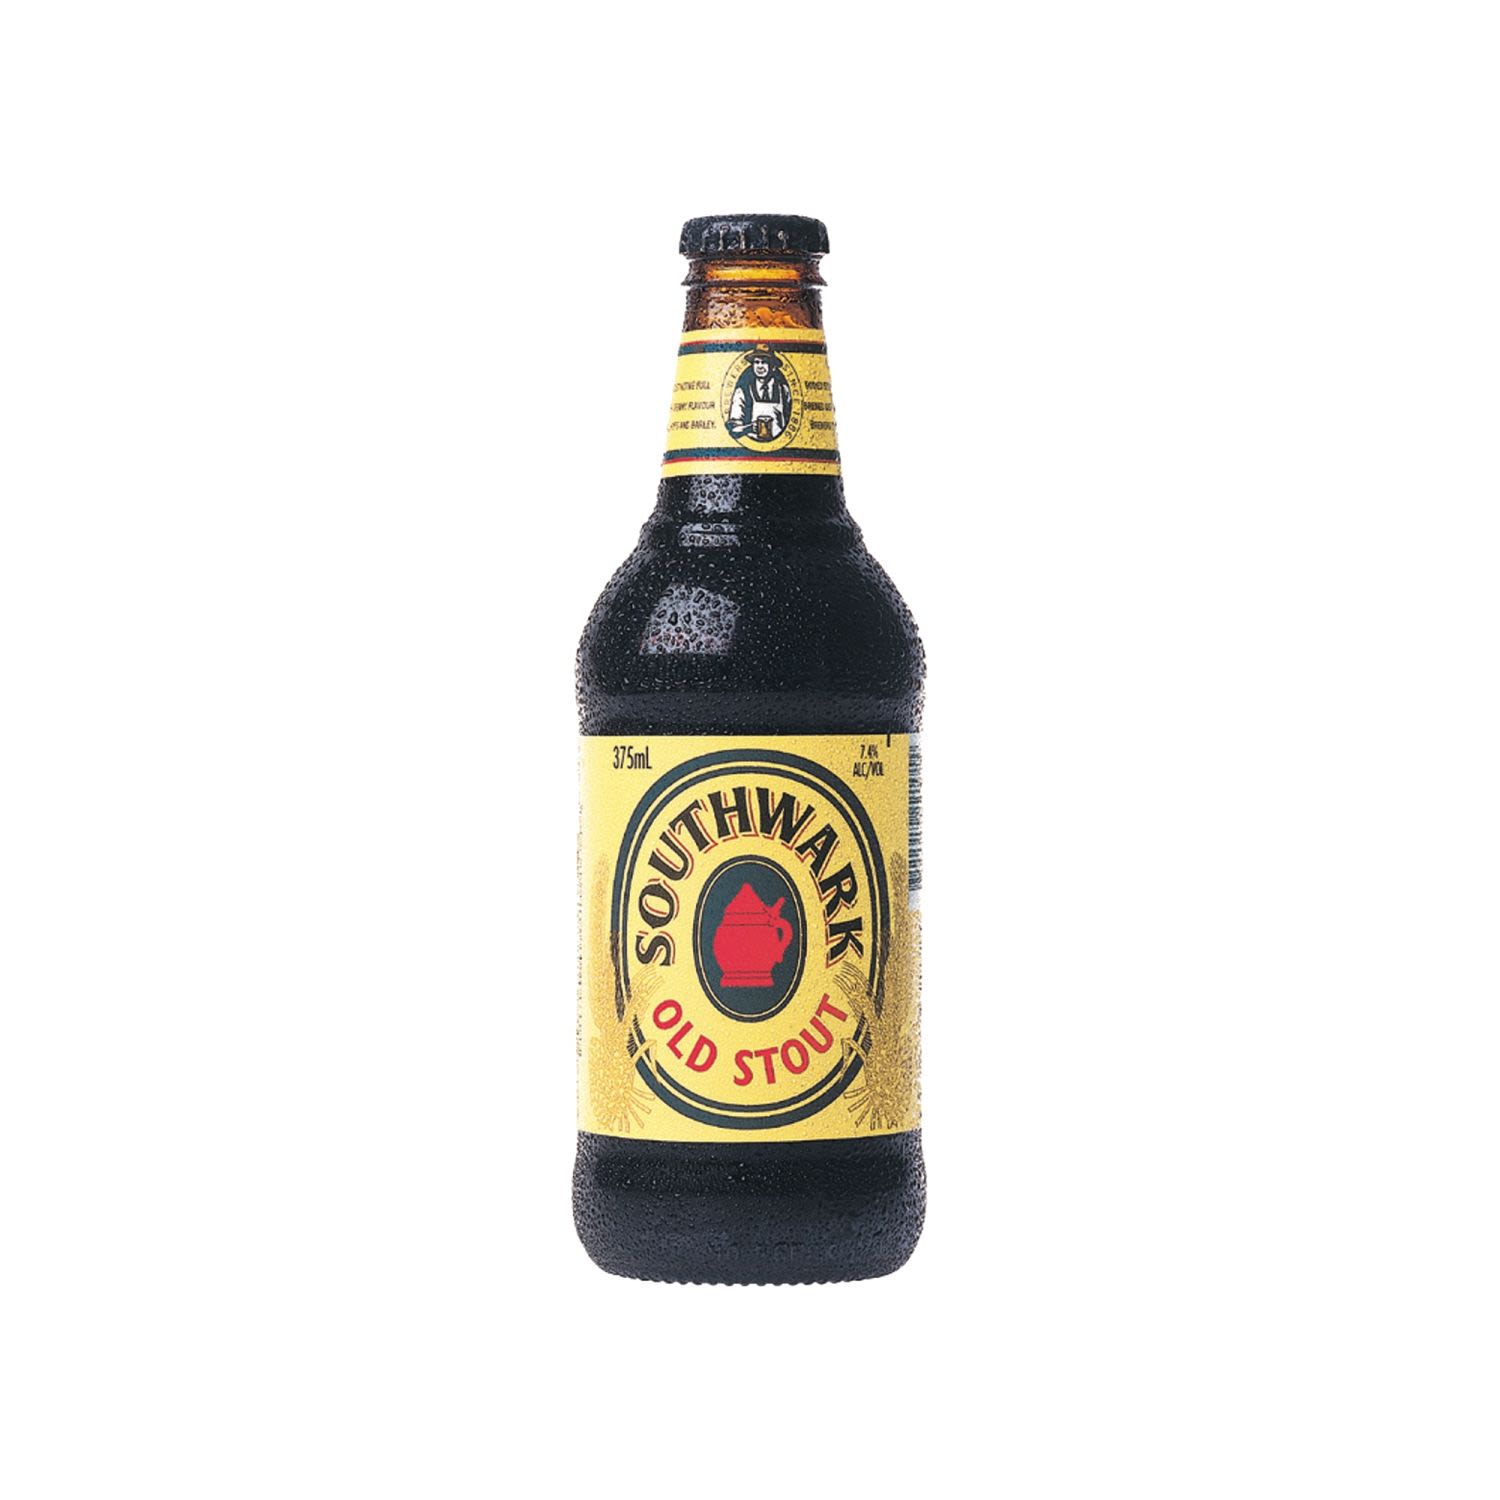 Southwark Old Stout 375mL 24 Pack